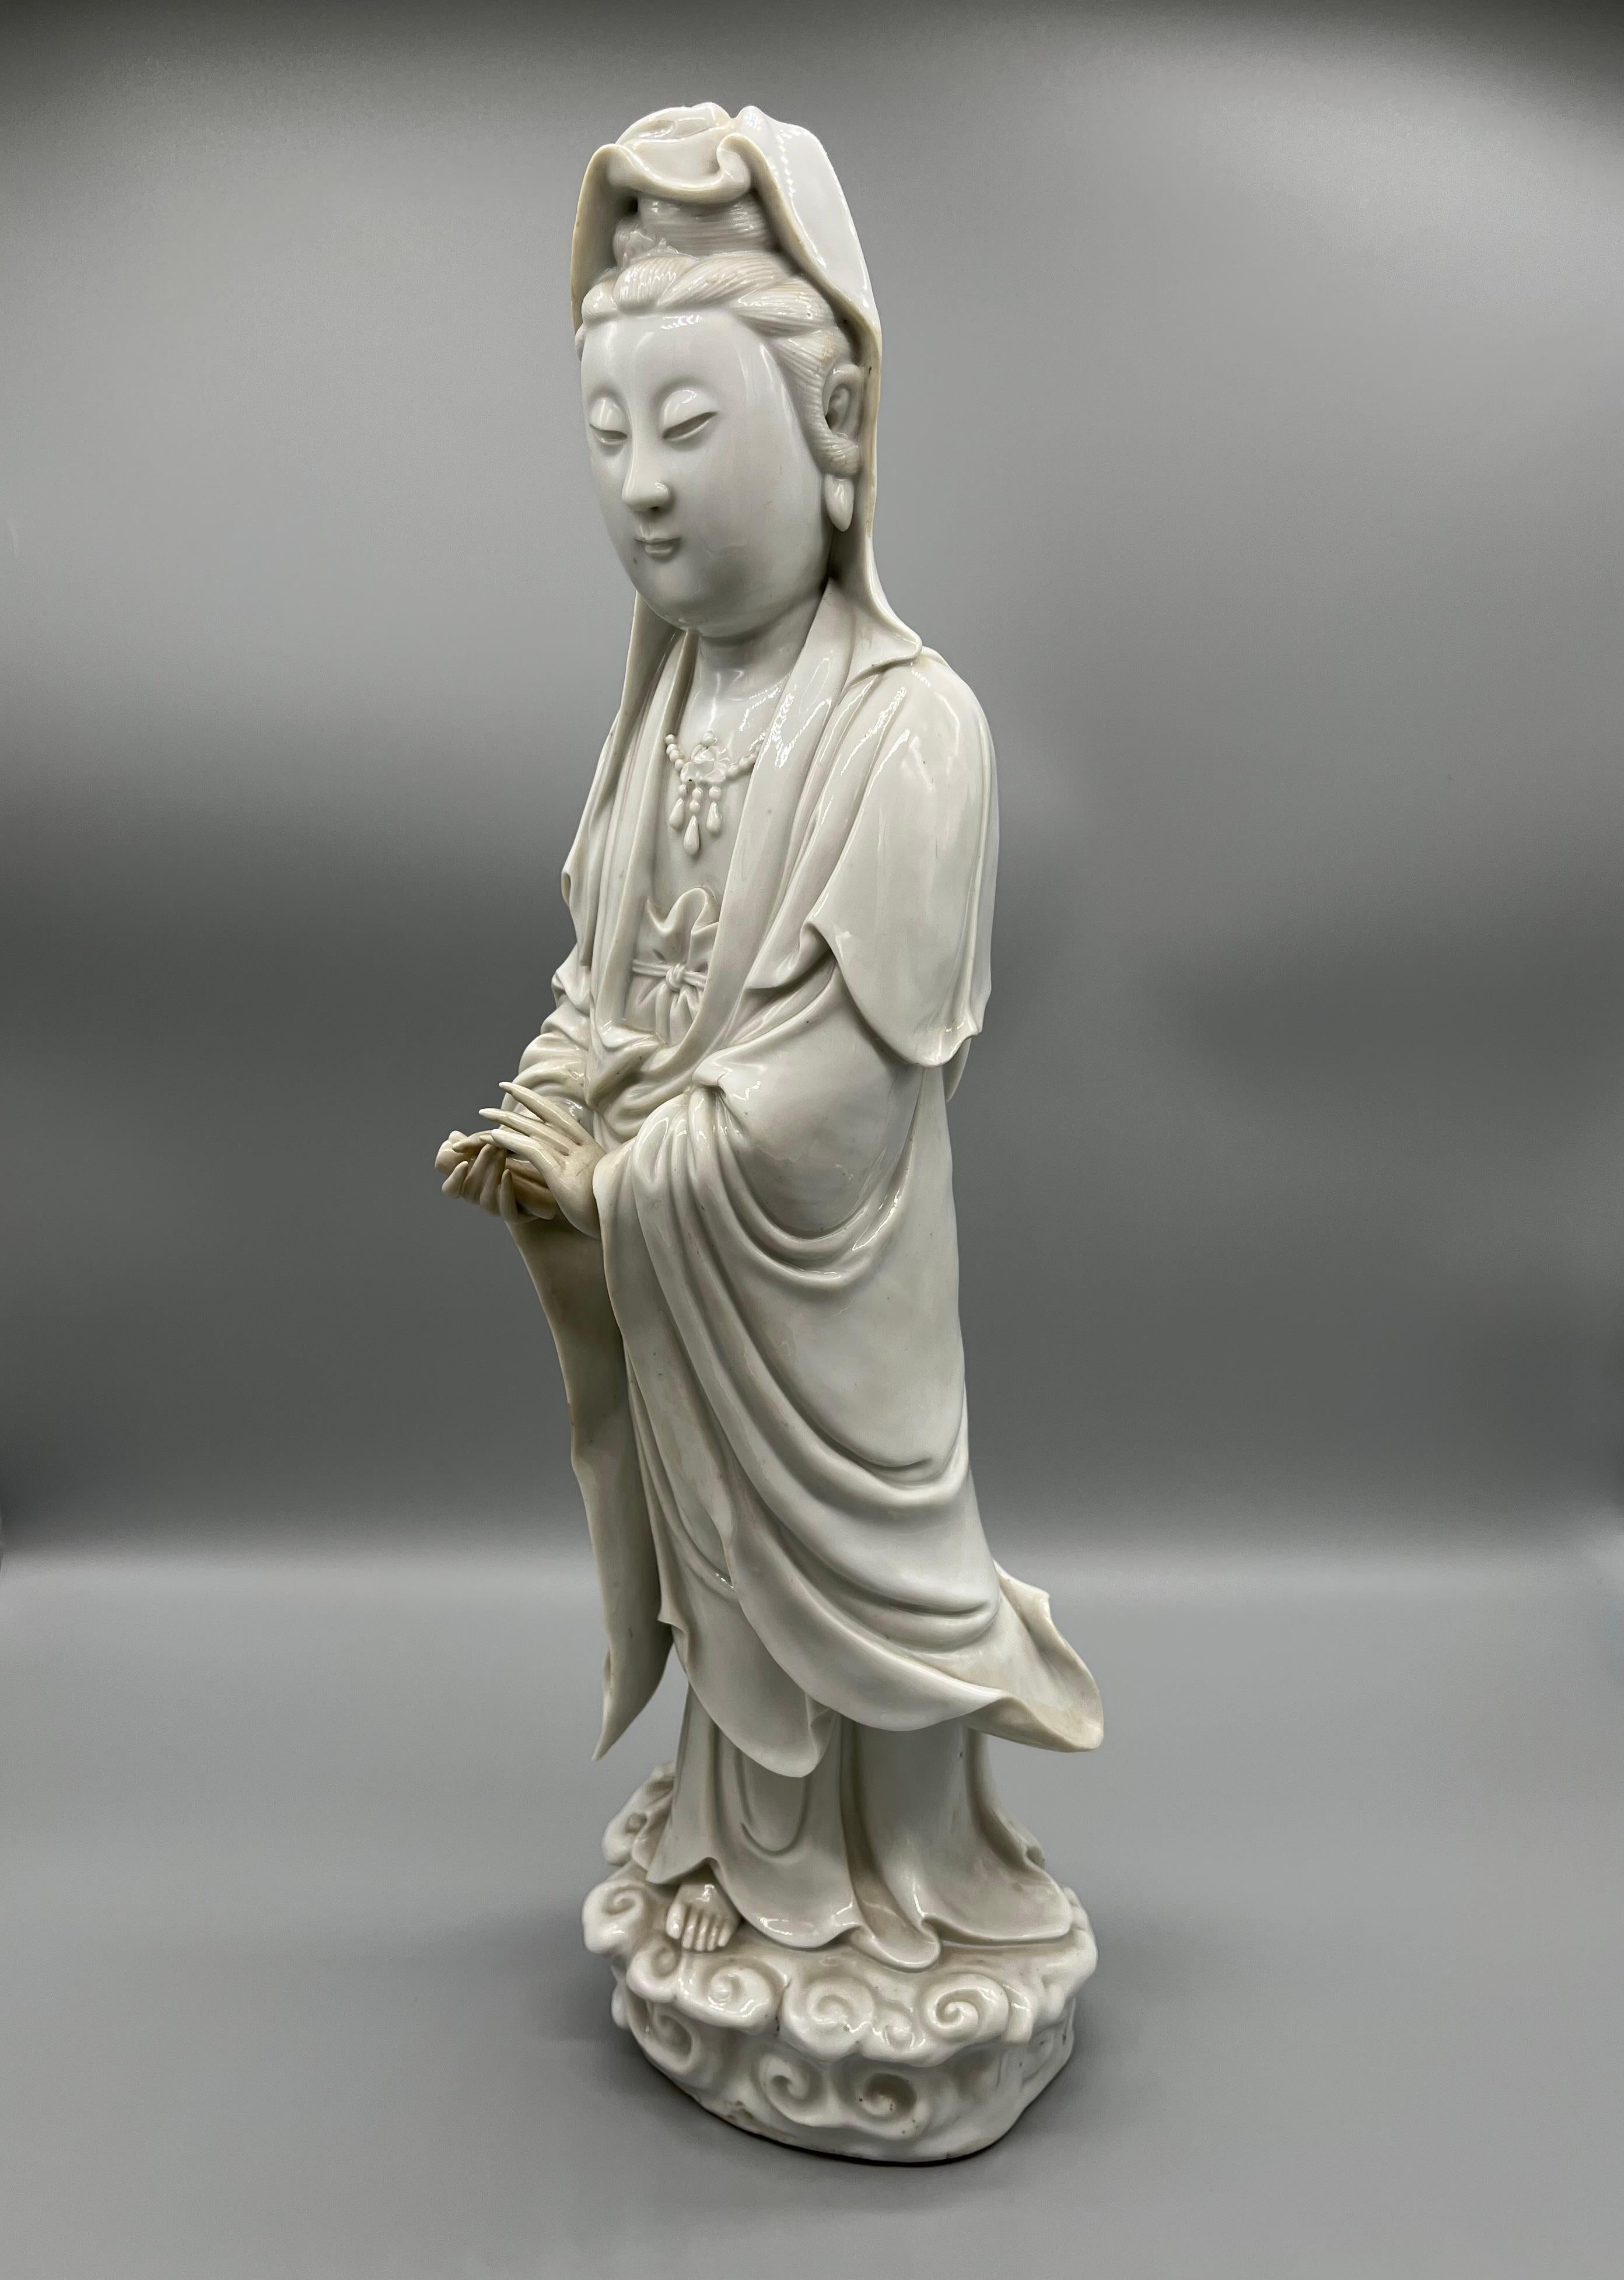 A Blanc-de Chine Figure of Guanyin (goddess of mercy) standing on a pedestal of waves, the arms lifted to the waist, dressed in loose fitting robes opening at the chest to reveal a necklace, applied with an ivory glaze. China antique.